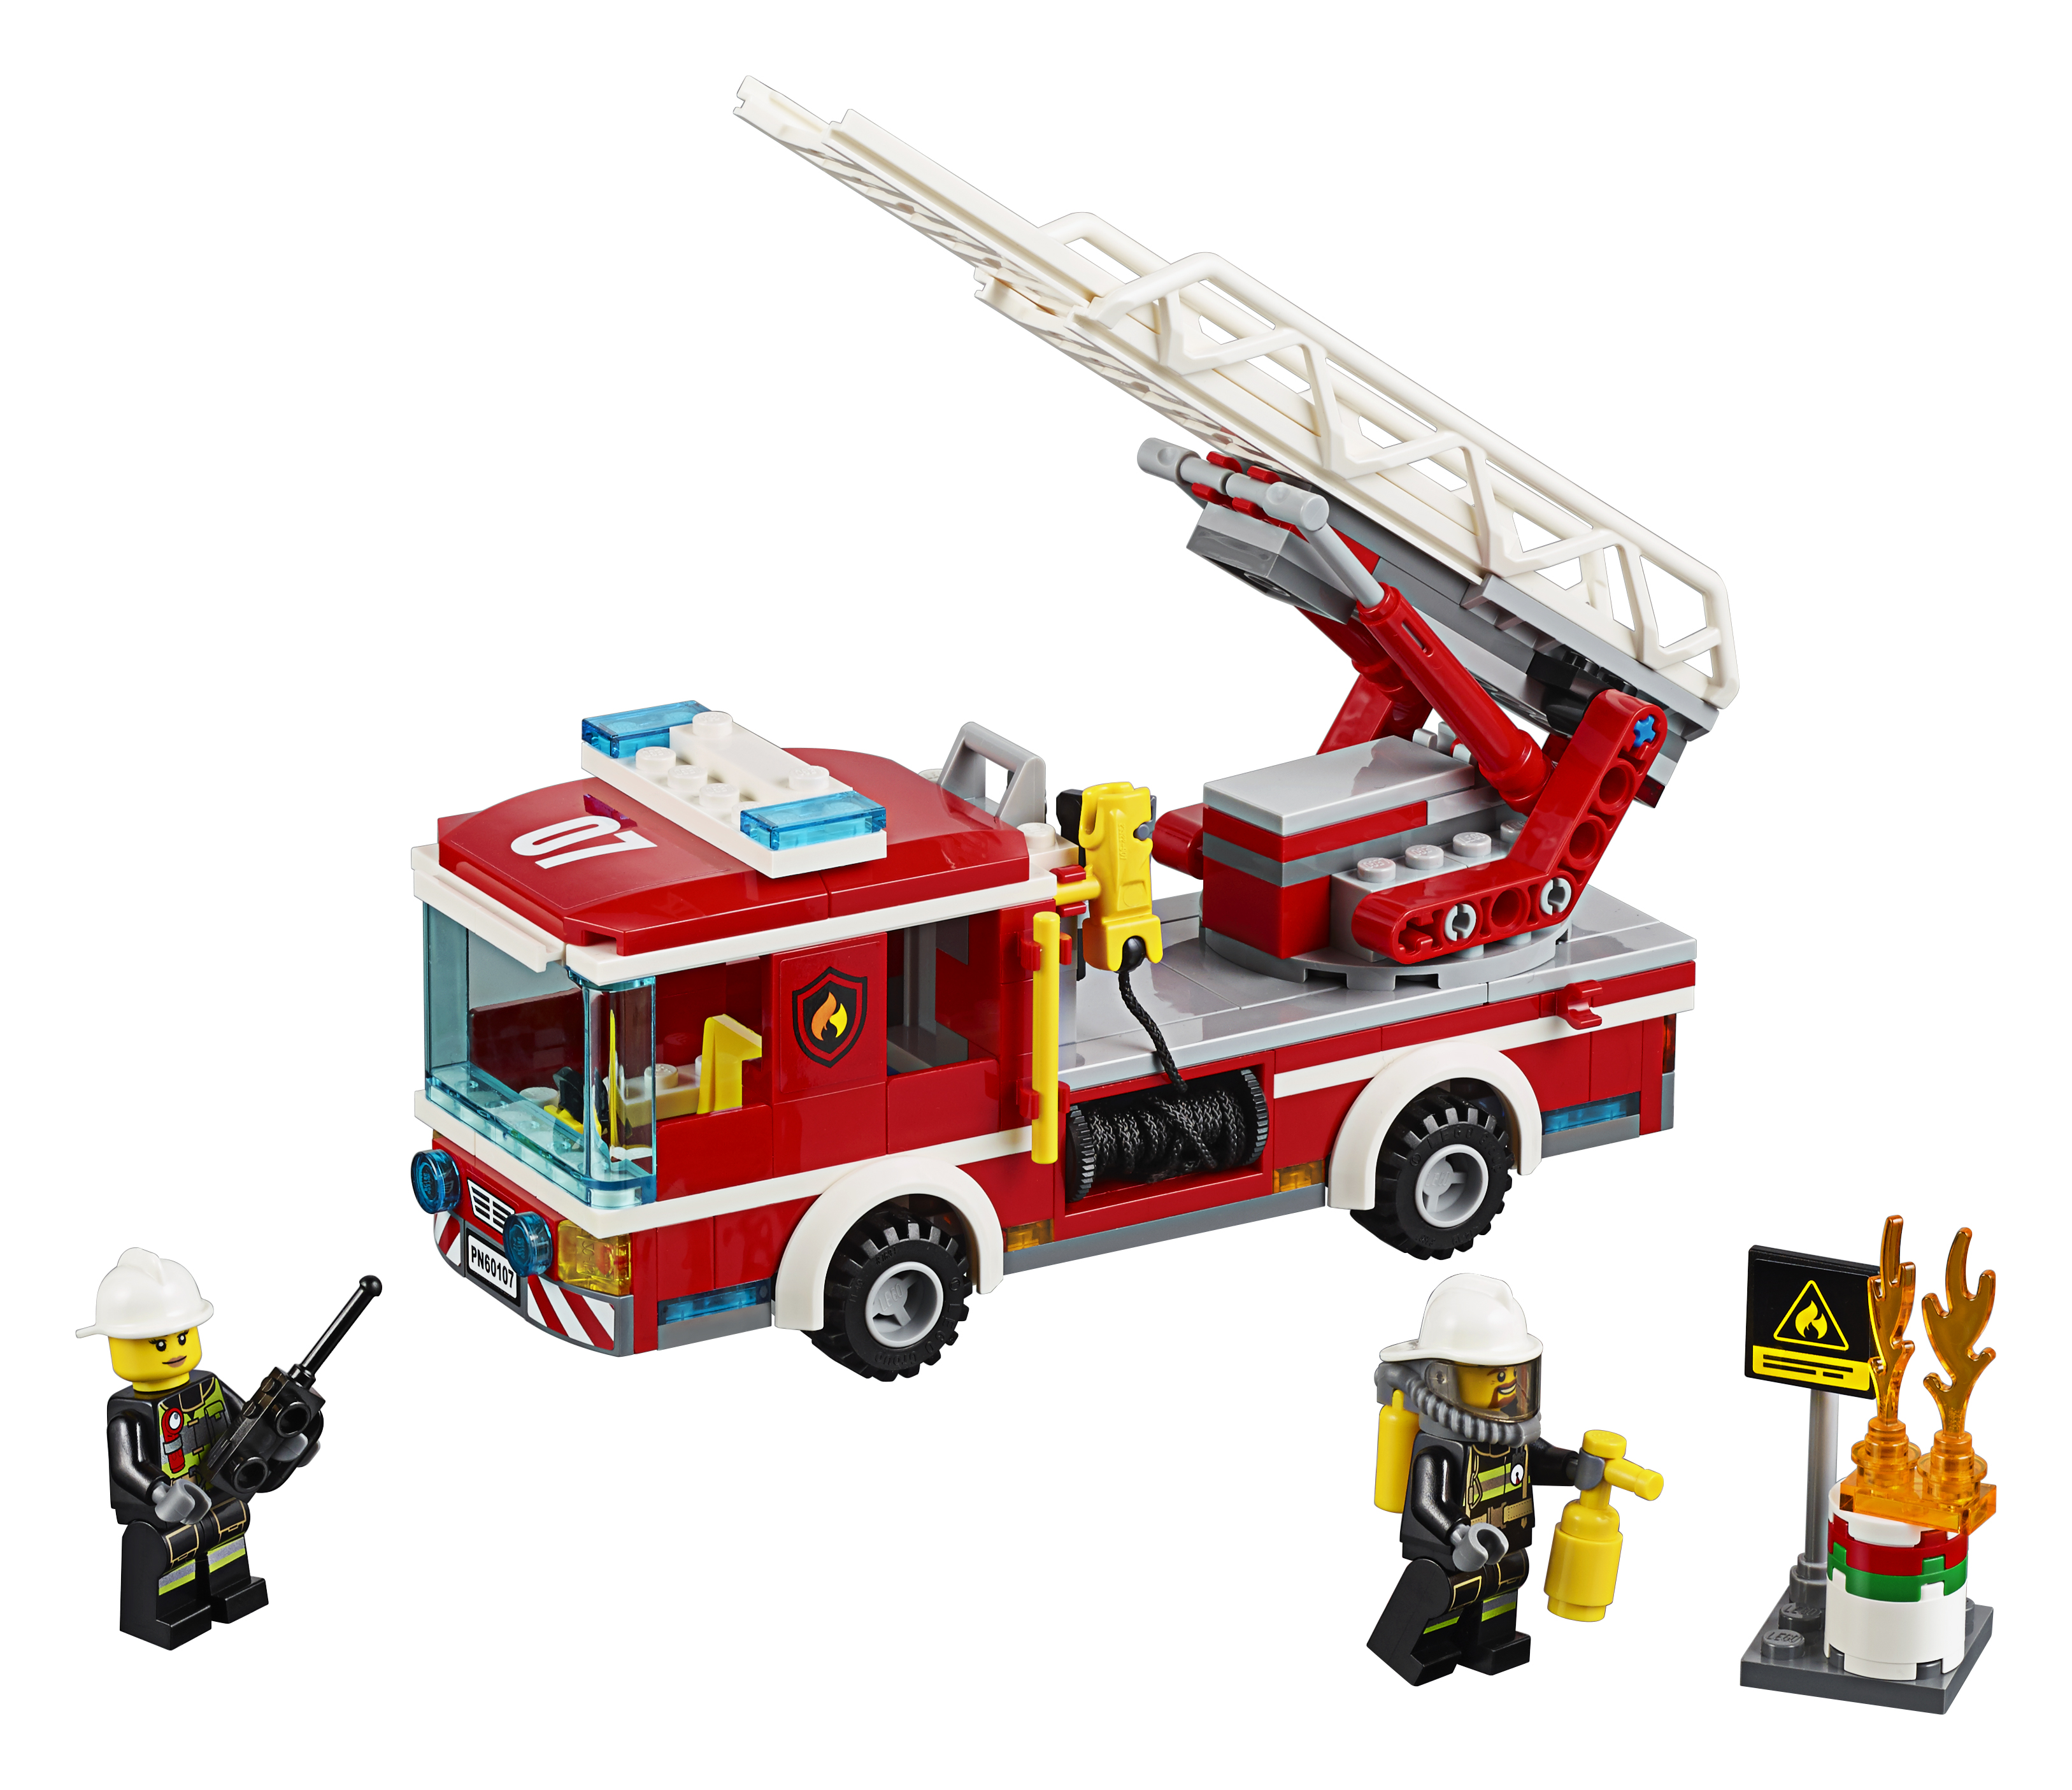 LEGO City Fire Fire Ladder Truck 60107 - image 2 of 4